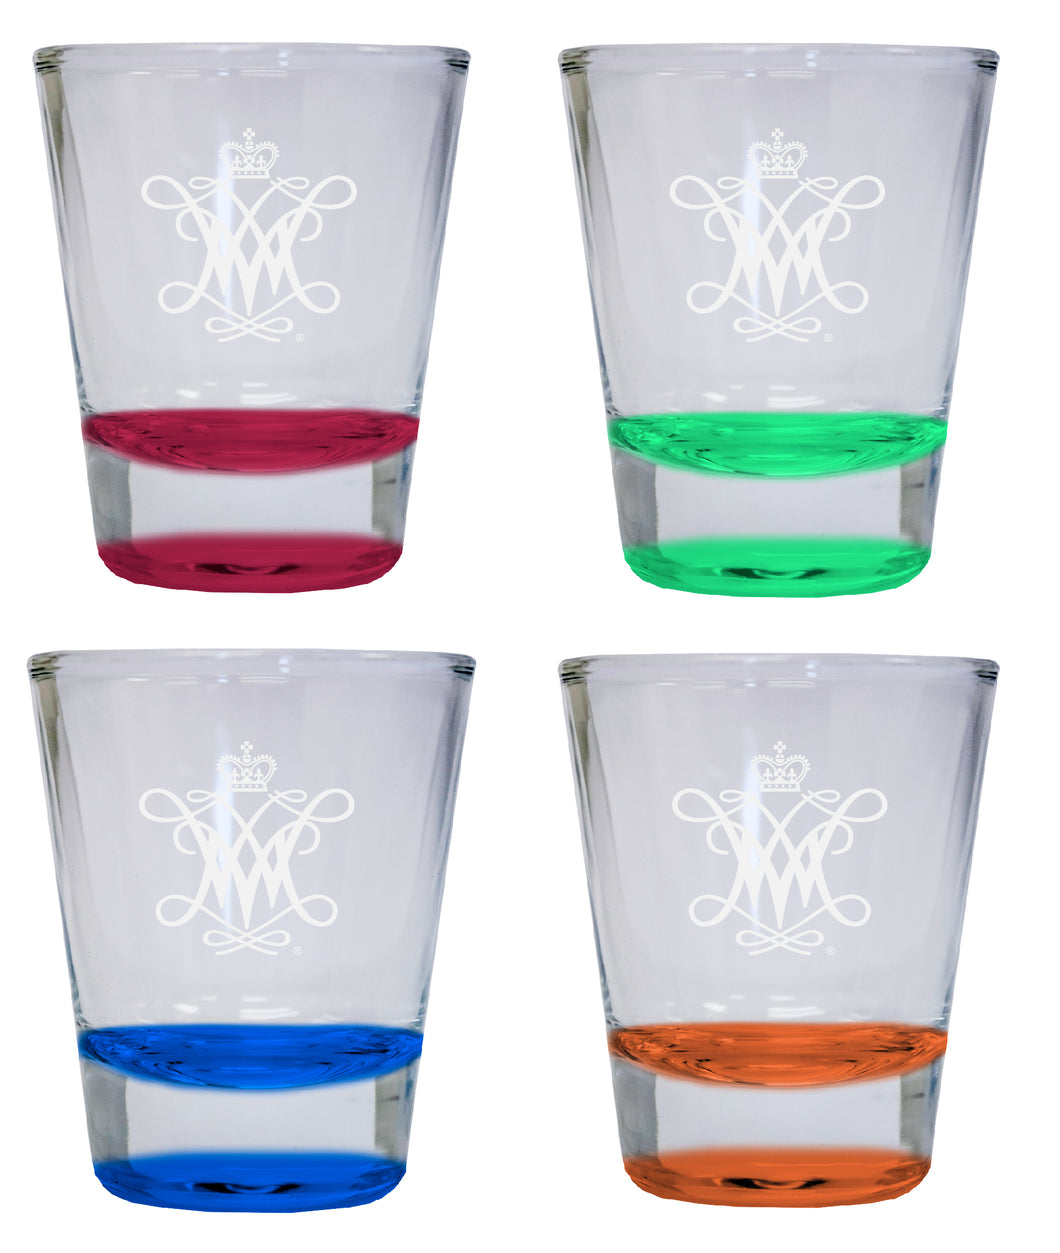 NCAA William and Mary Collector's 2oz Laser-Engraved Spirit Shot Glass Red, Orange, Blue and Green 4-Pack